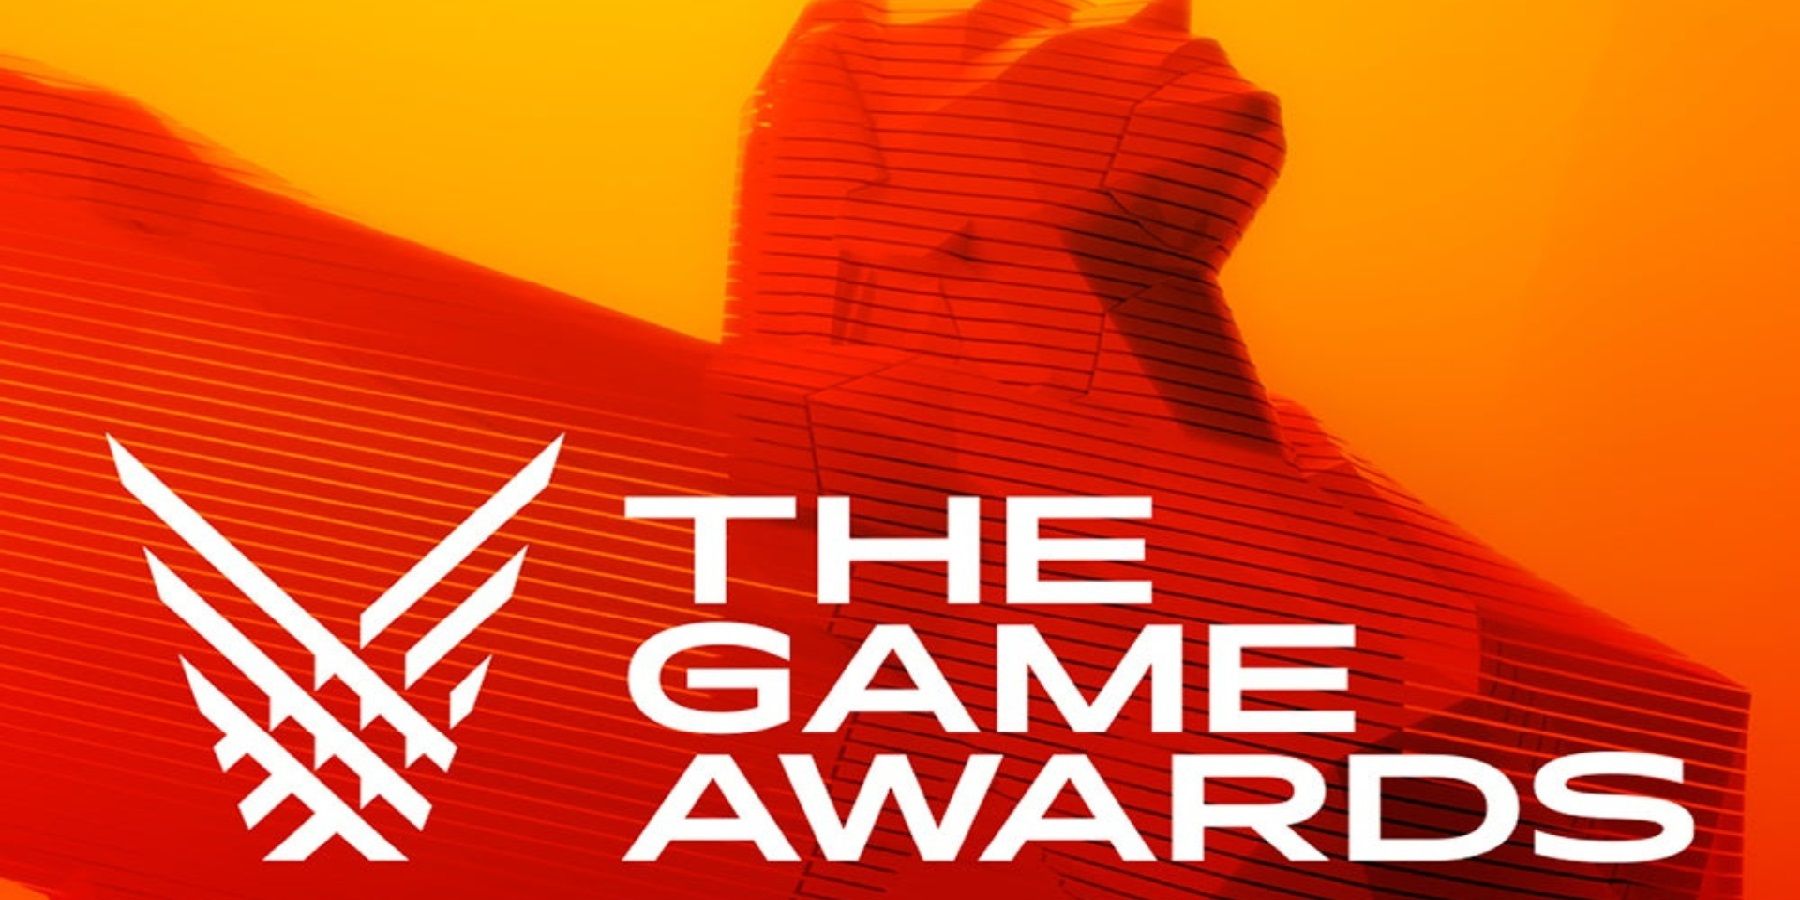 All The Game Awards 2022 winners across all categories (Live) - Game of the  Year, Best Game Direction, and more